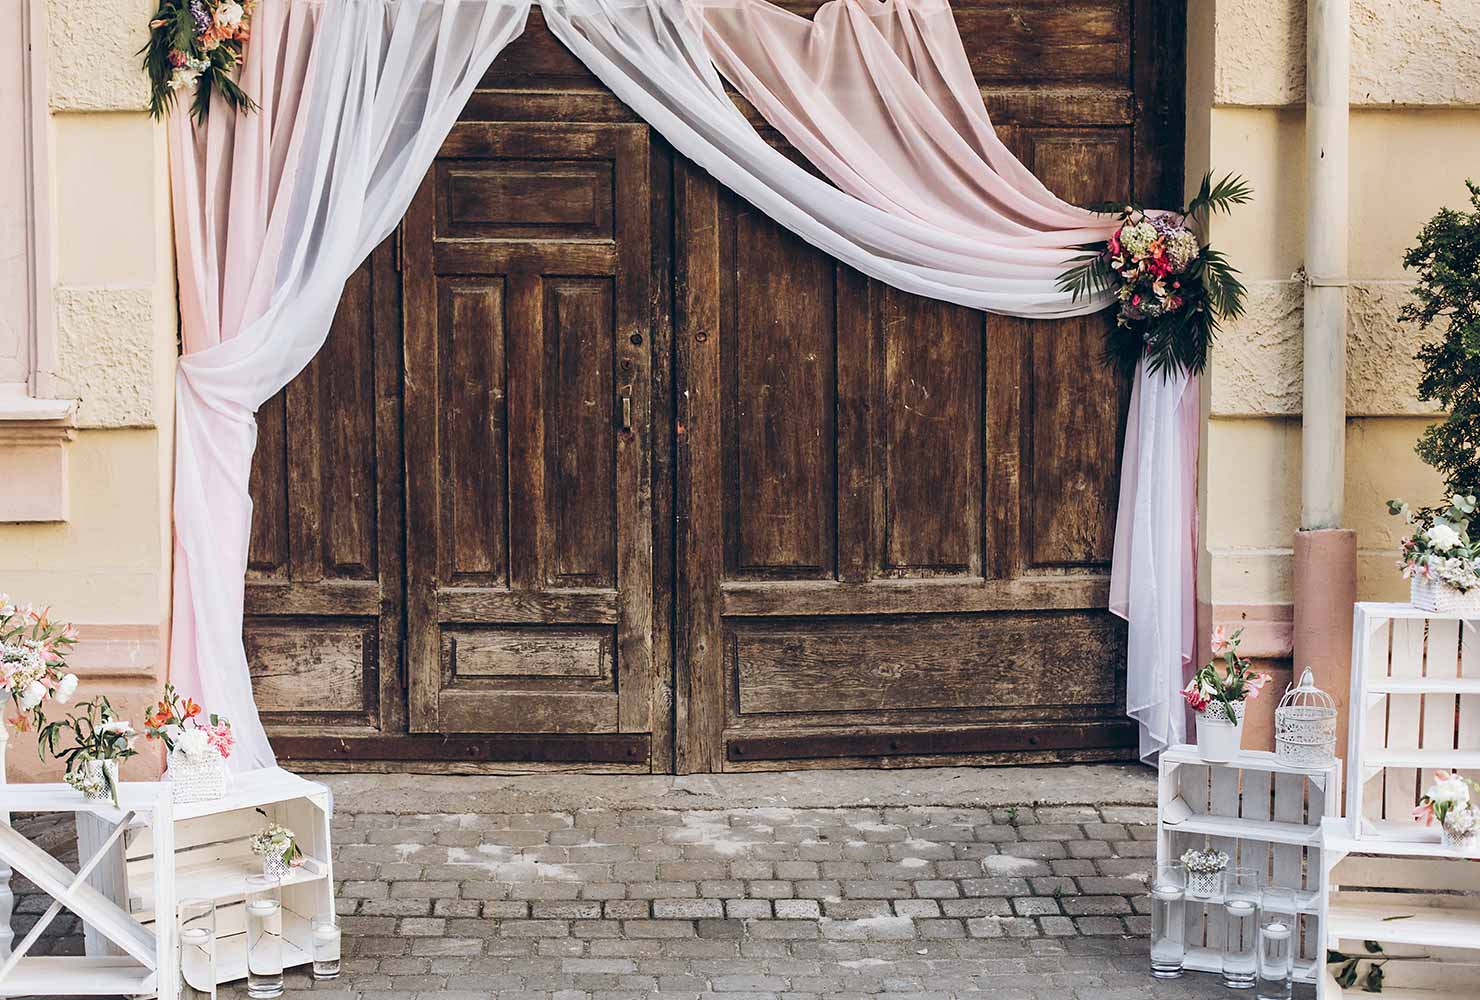 Rustic door with blush curtains.